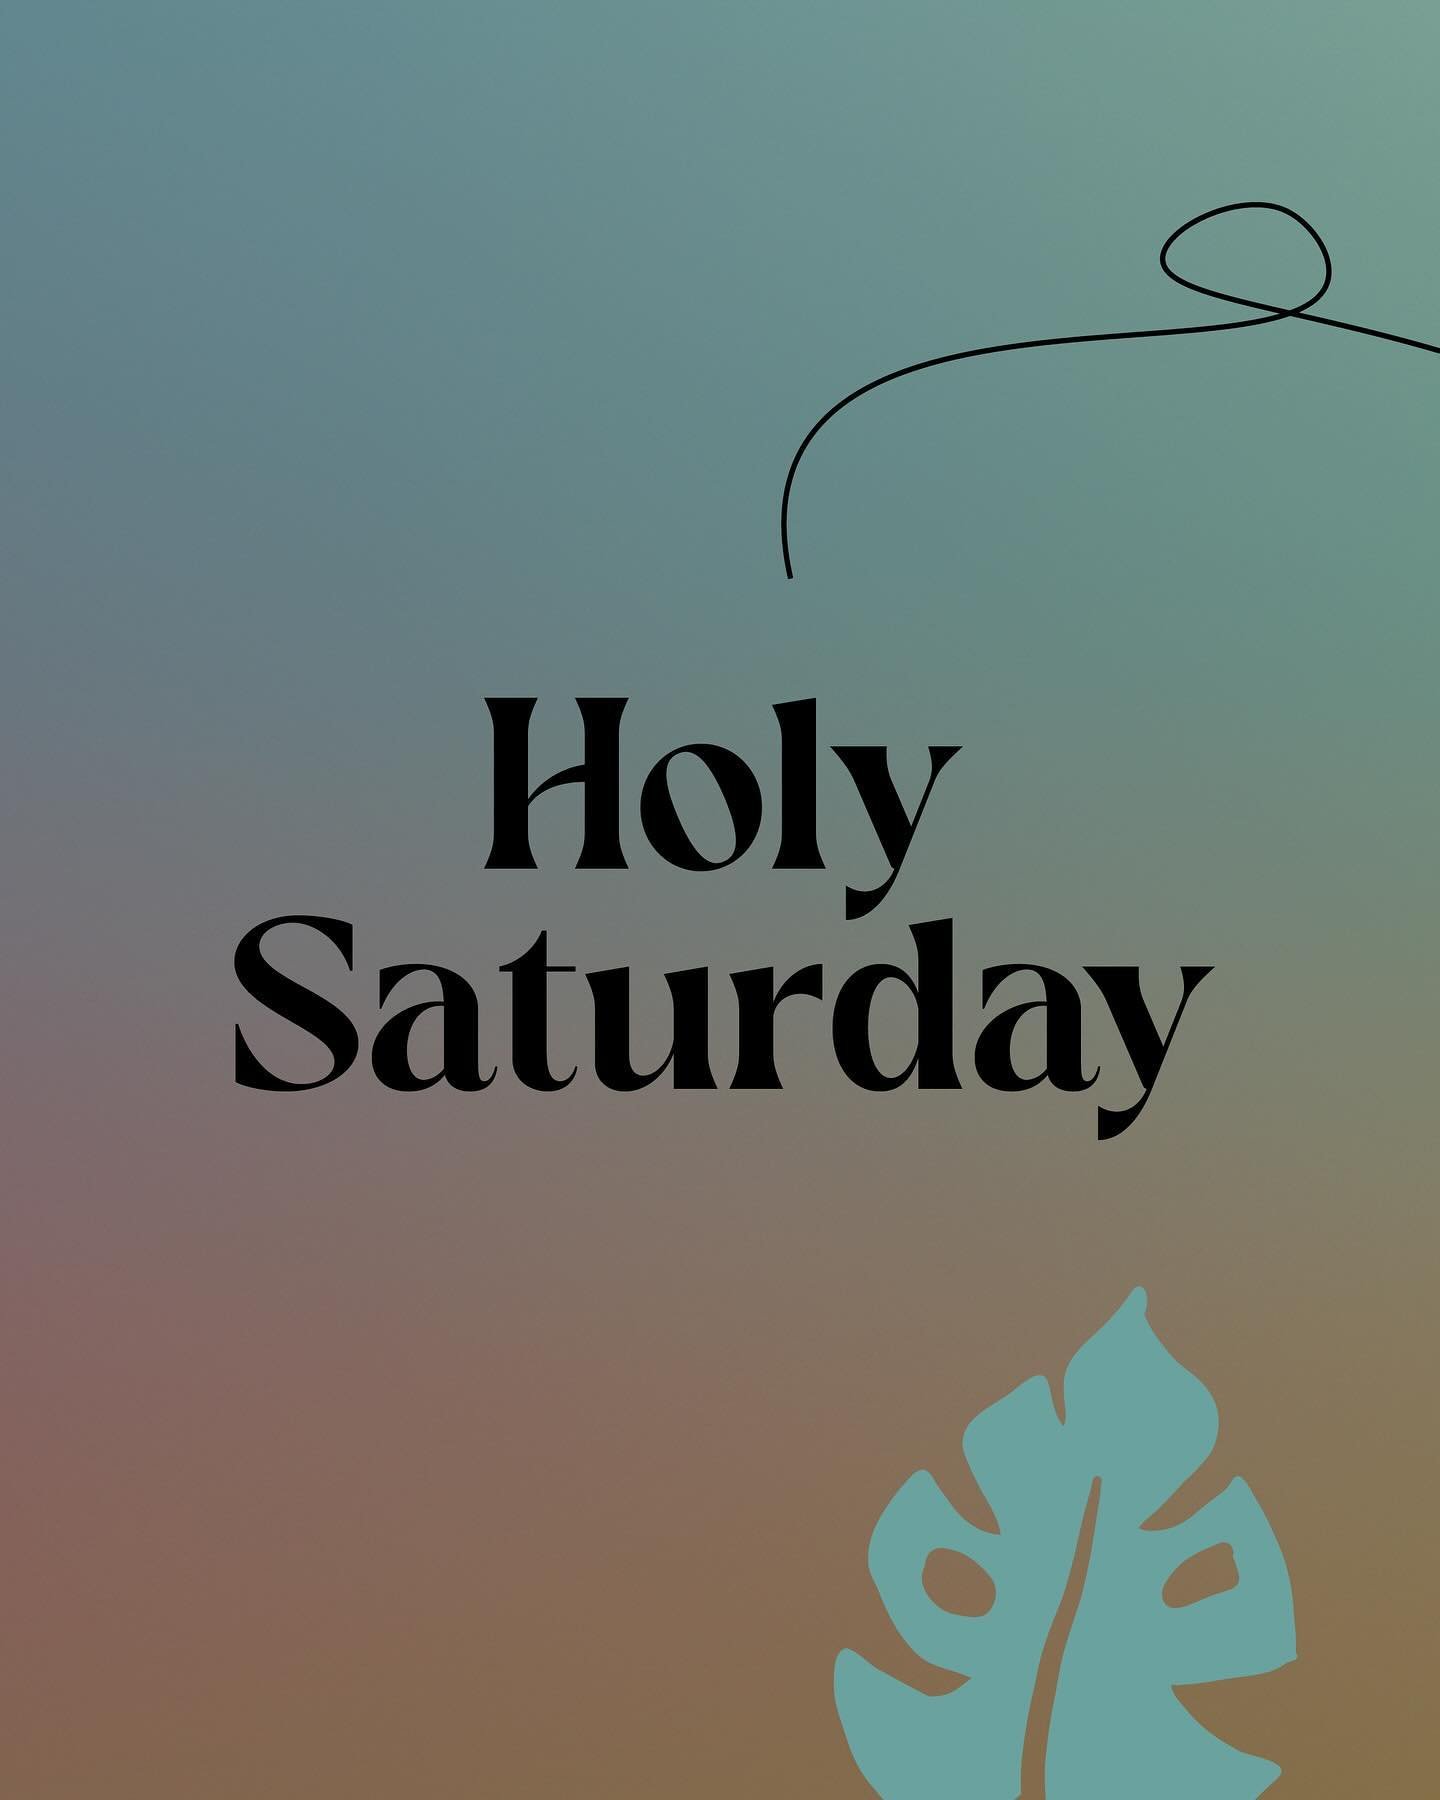 Come join us this Holy Saturday as we reflect on the awkward in-between day of the death of our Saviour and the day we celebrate His victory and triumph as our Risen King! 

Holy Saturday Service: Mariner Campus
6:00pm